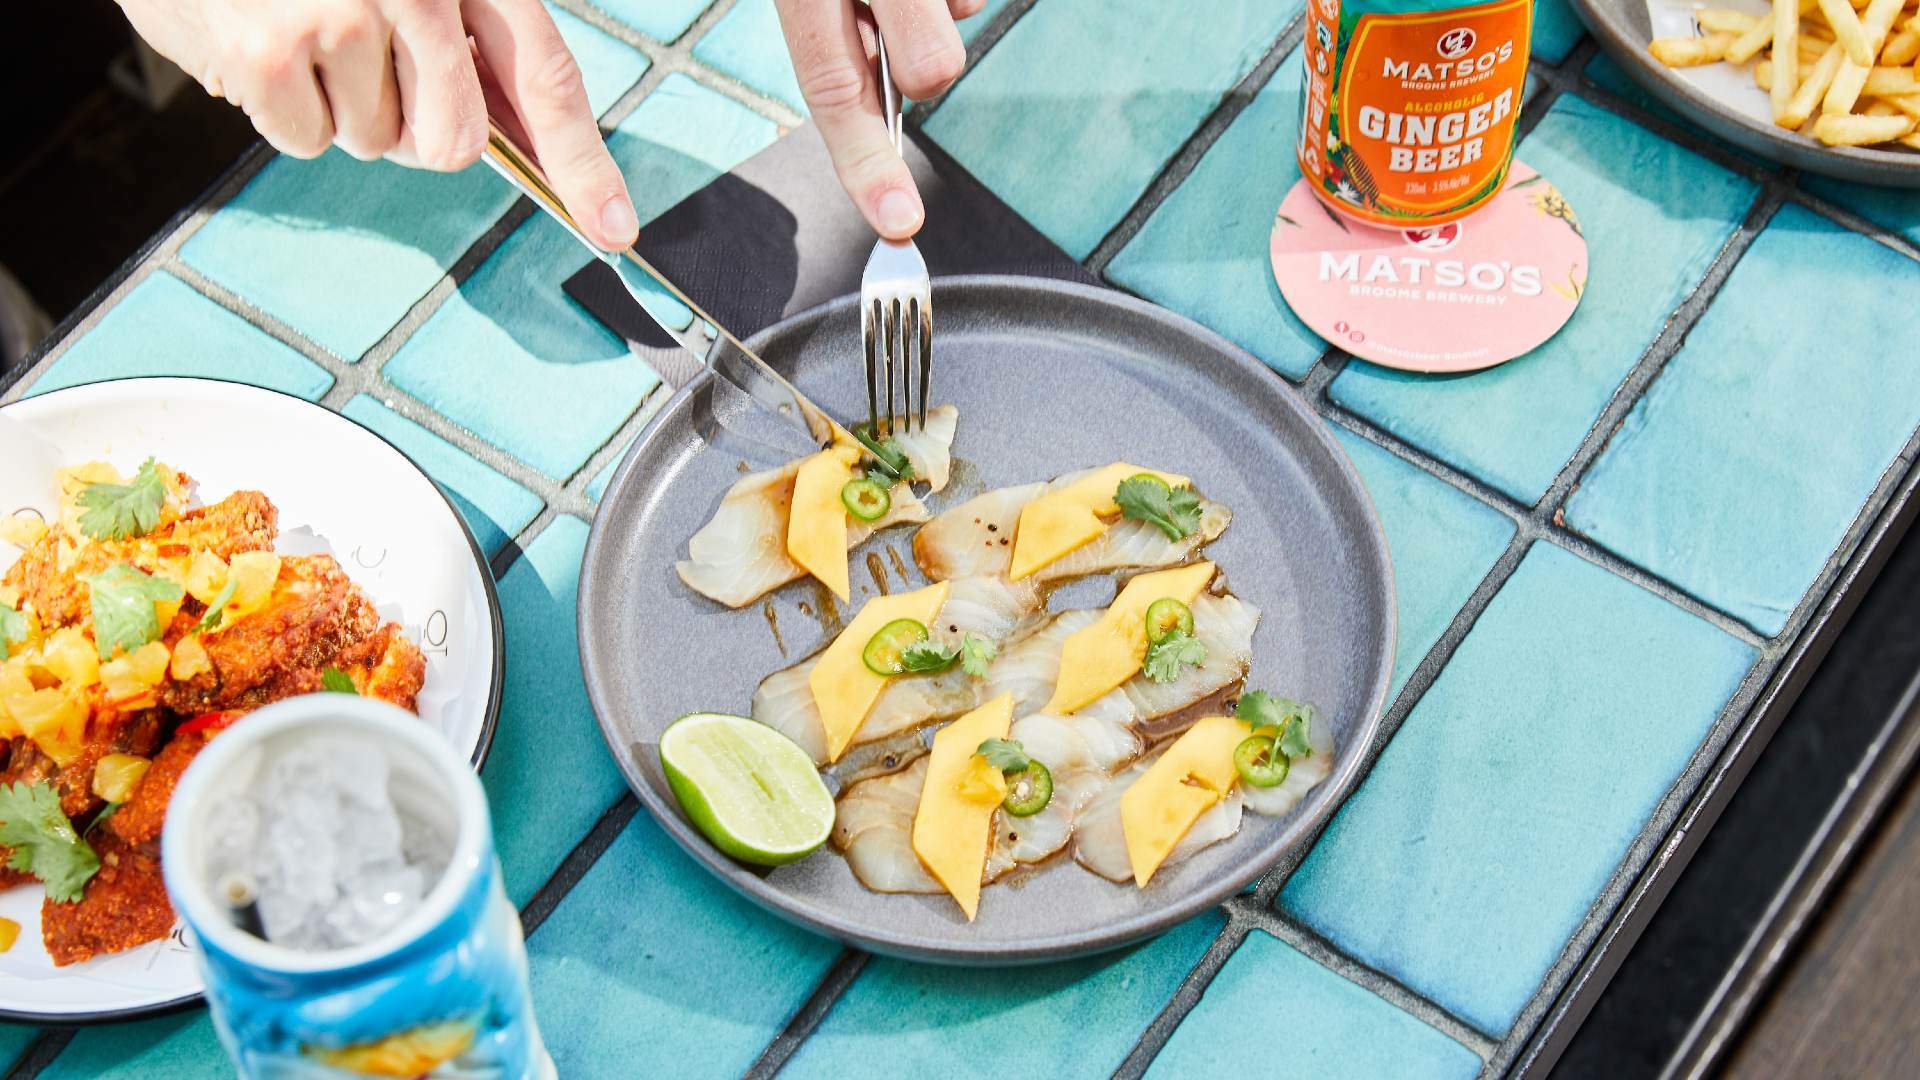 Plate of ceviche on a blue tiled table